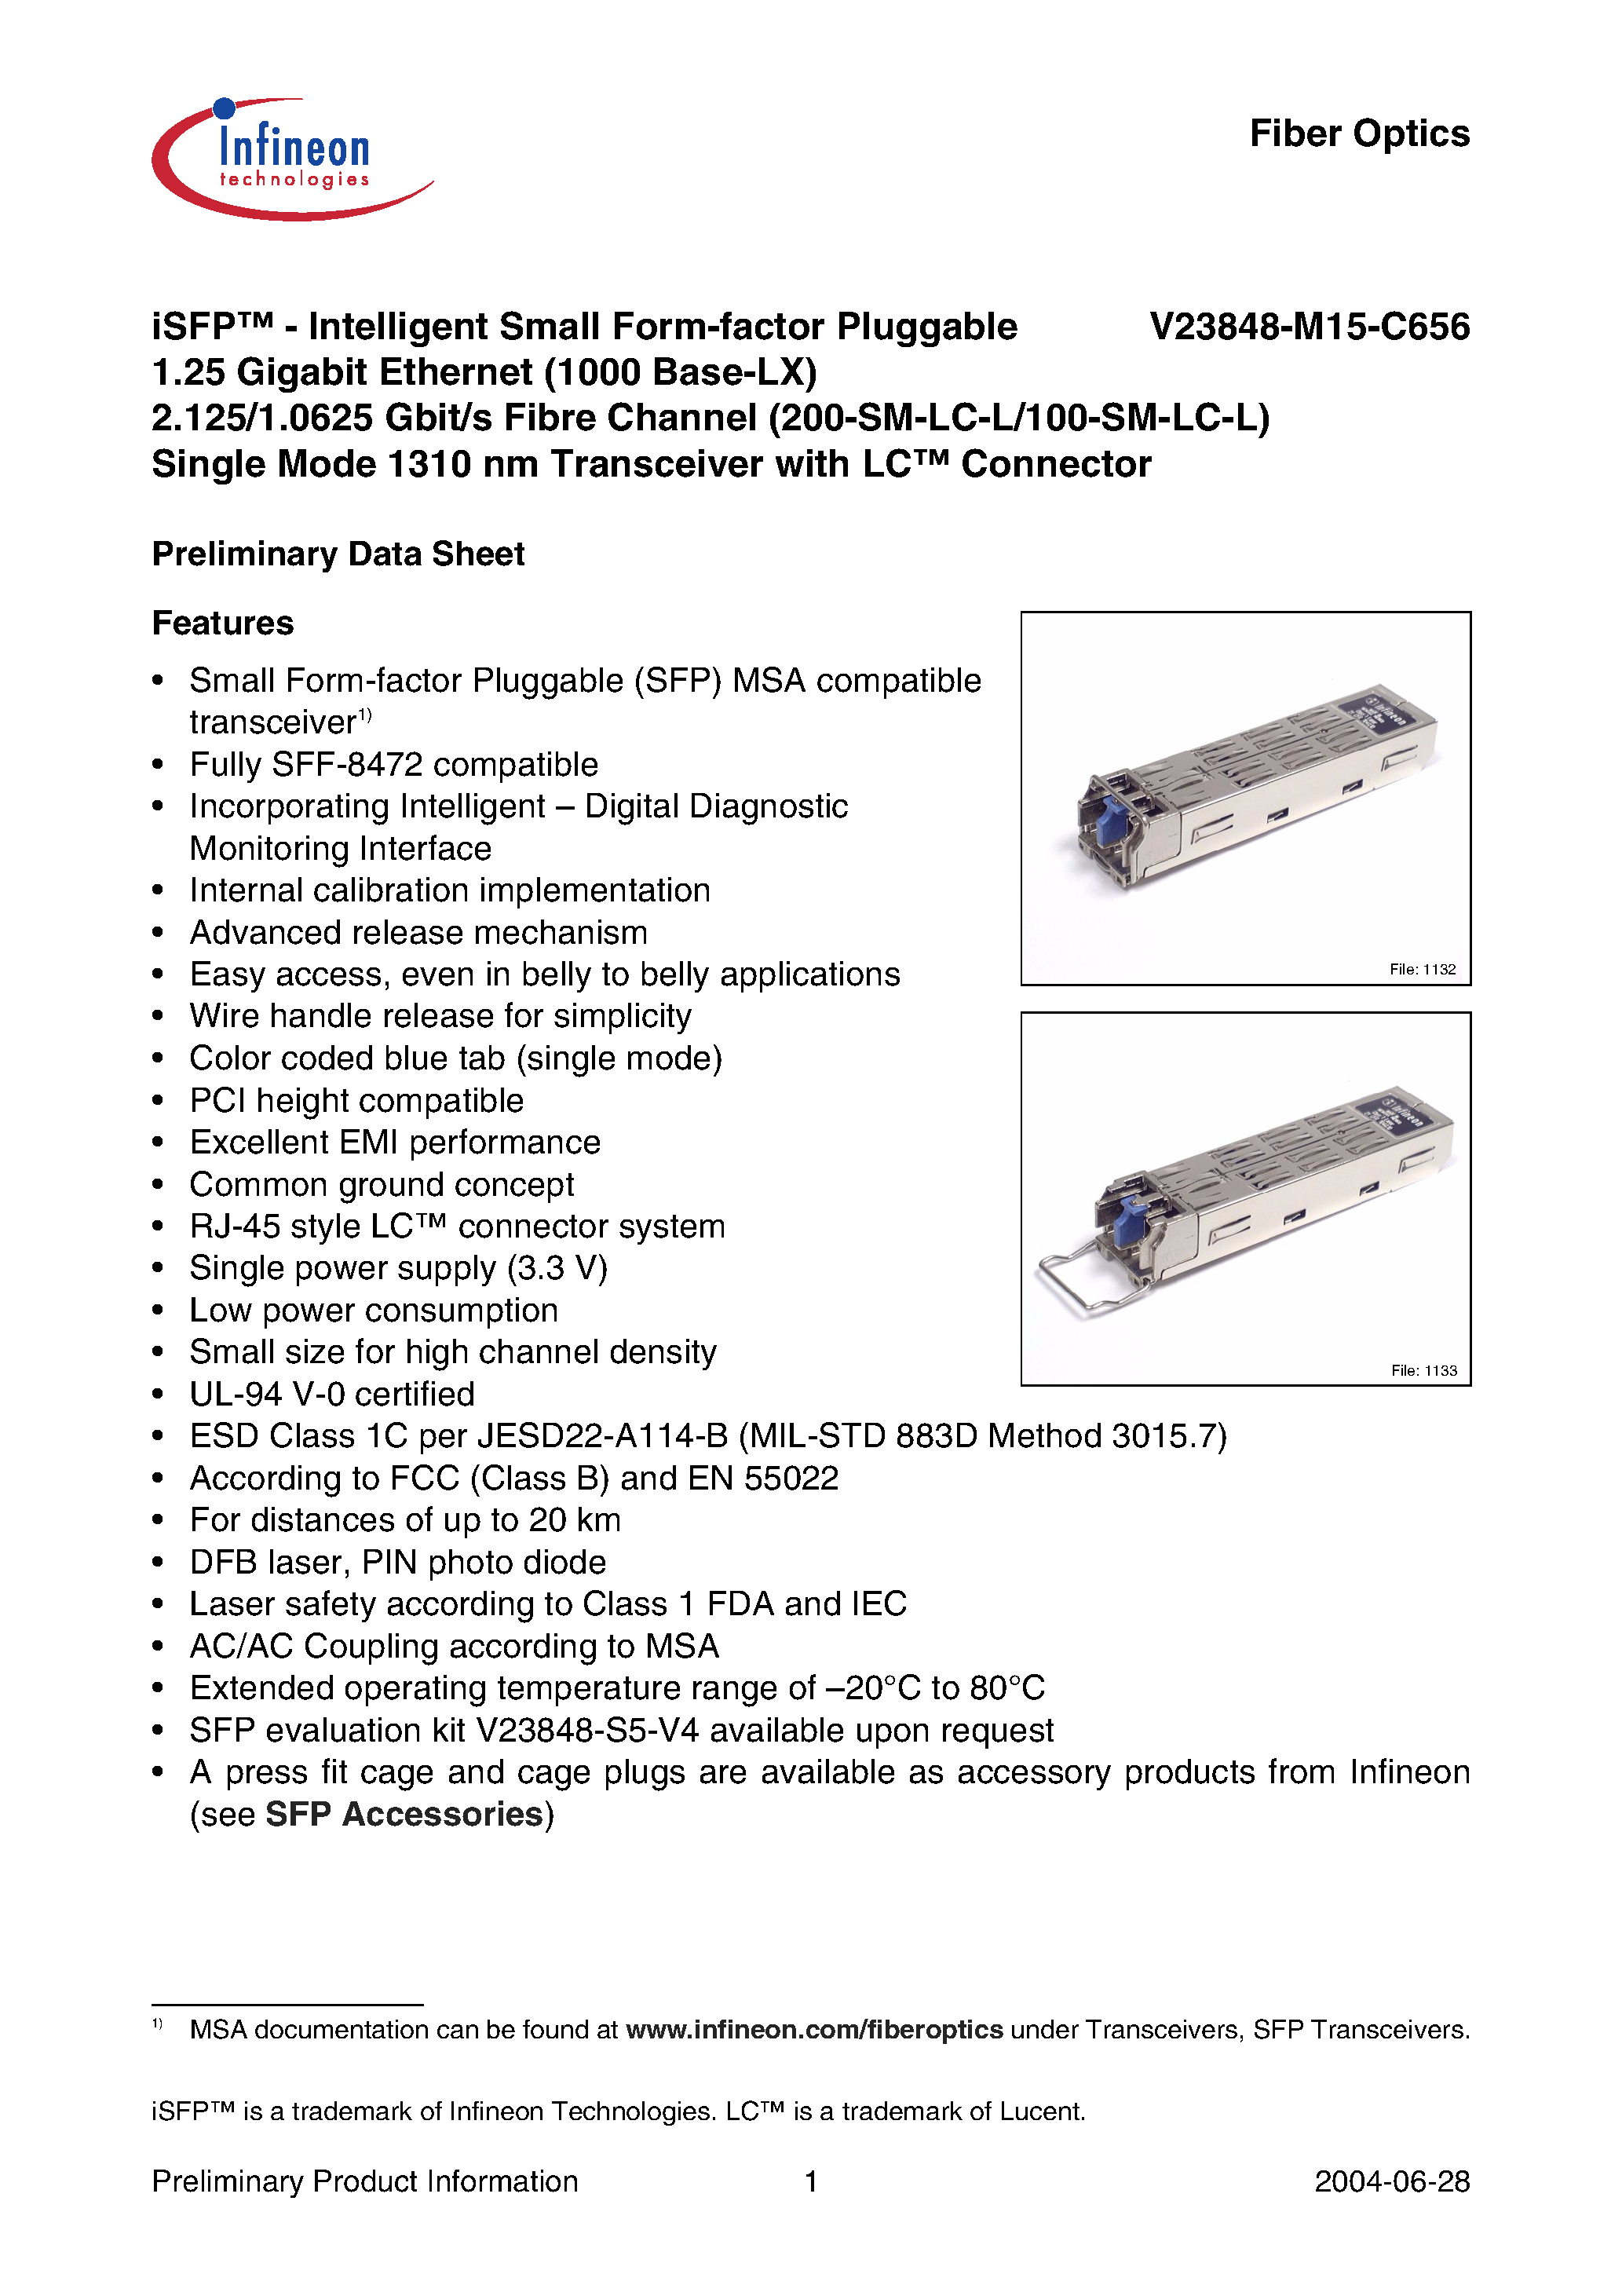 Datasheet V23848-M15-C656 - iSFP-Intelligent Small Form-factor Pluggable 1.25 Gigabit Ethernet 2.125/1.0625 Gbit/s Fibre Channel Single Mode 1310 nm Transceiver with LC Connector page 1